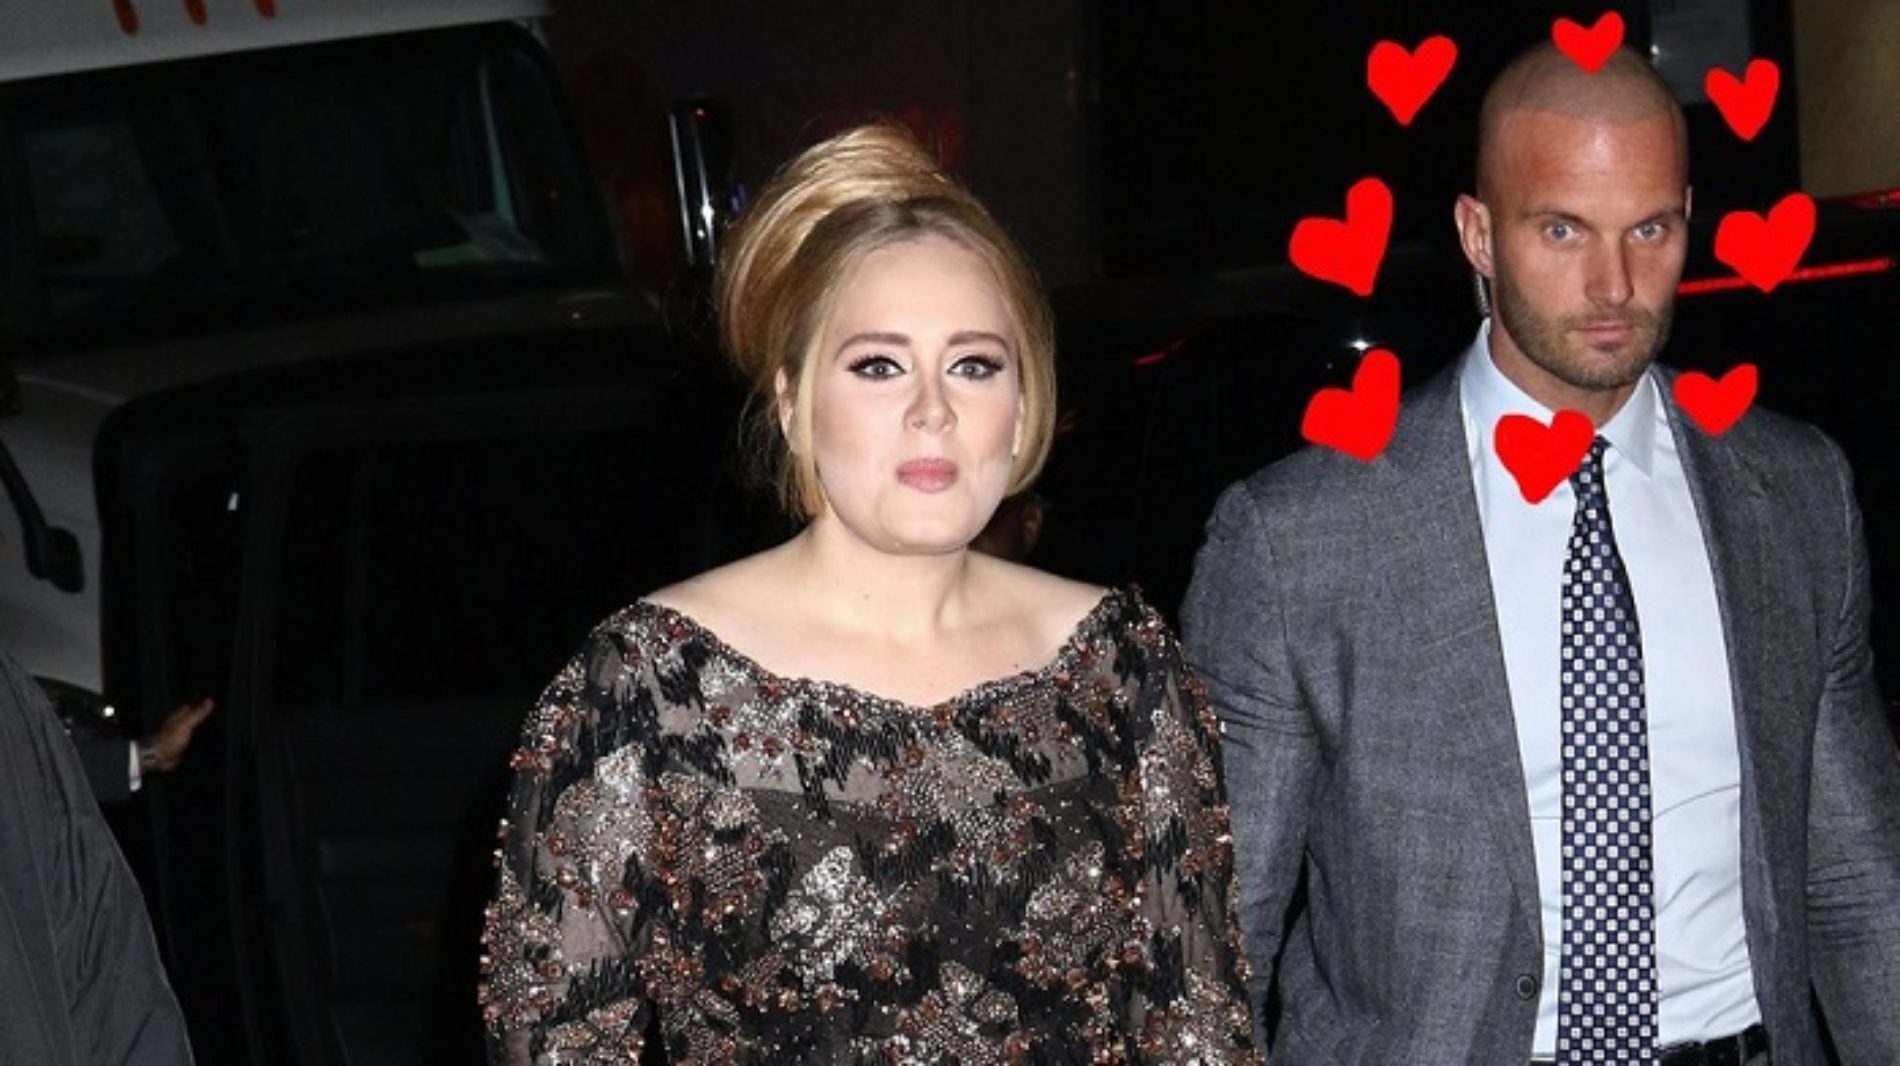 The Internet is obsessed with Adele’s new bodyguard